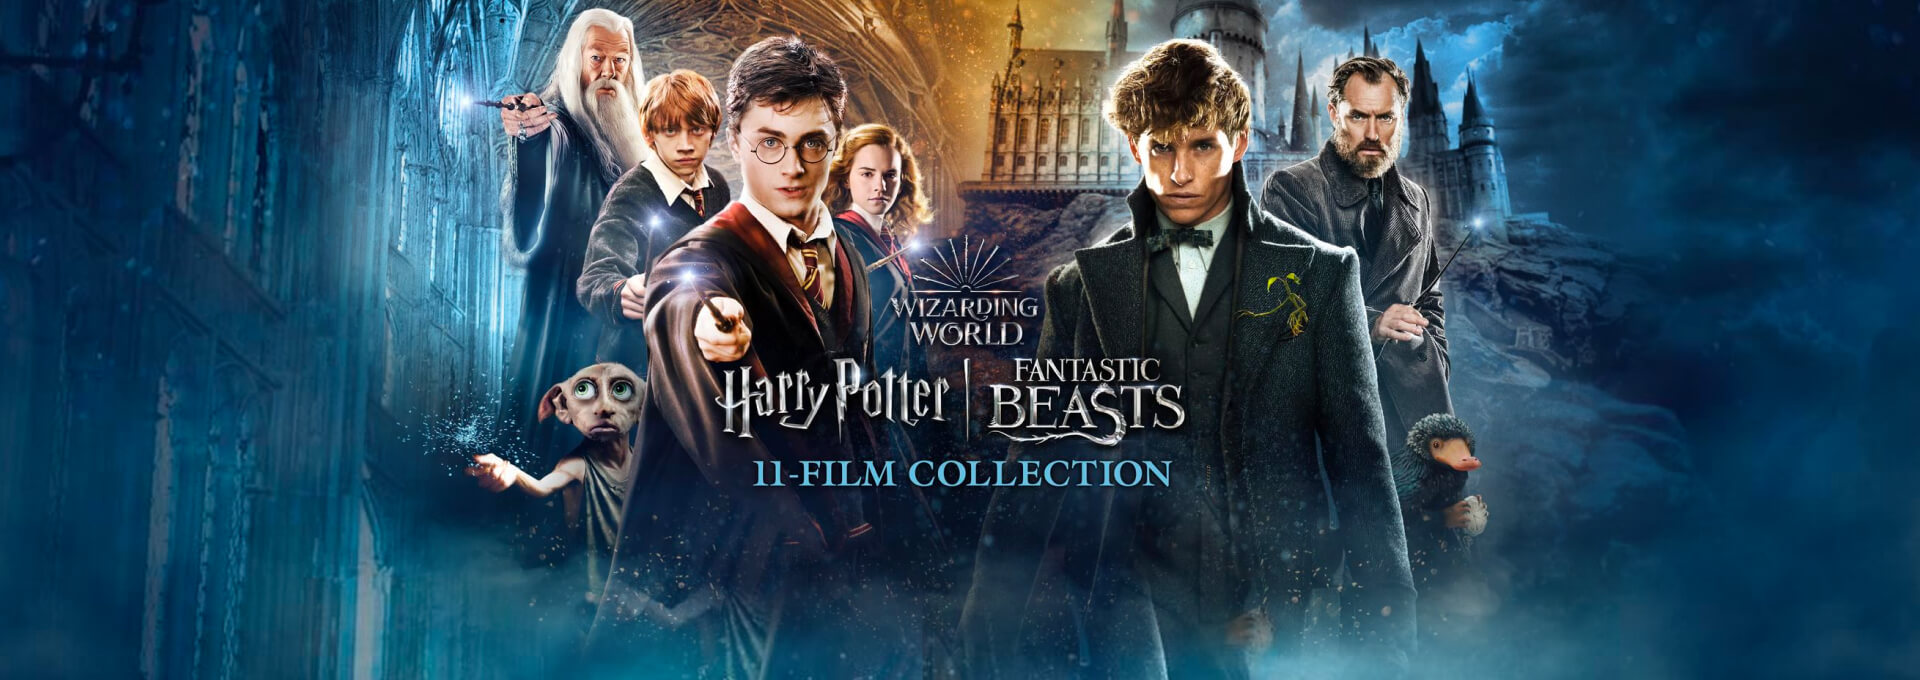 Fantastic Beasts: 11-Film Collection